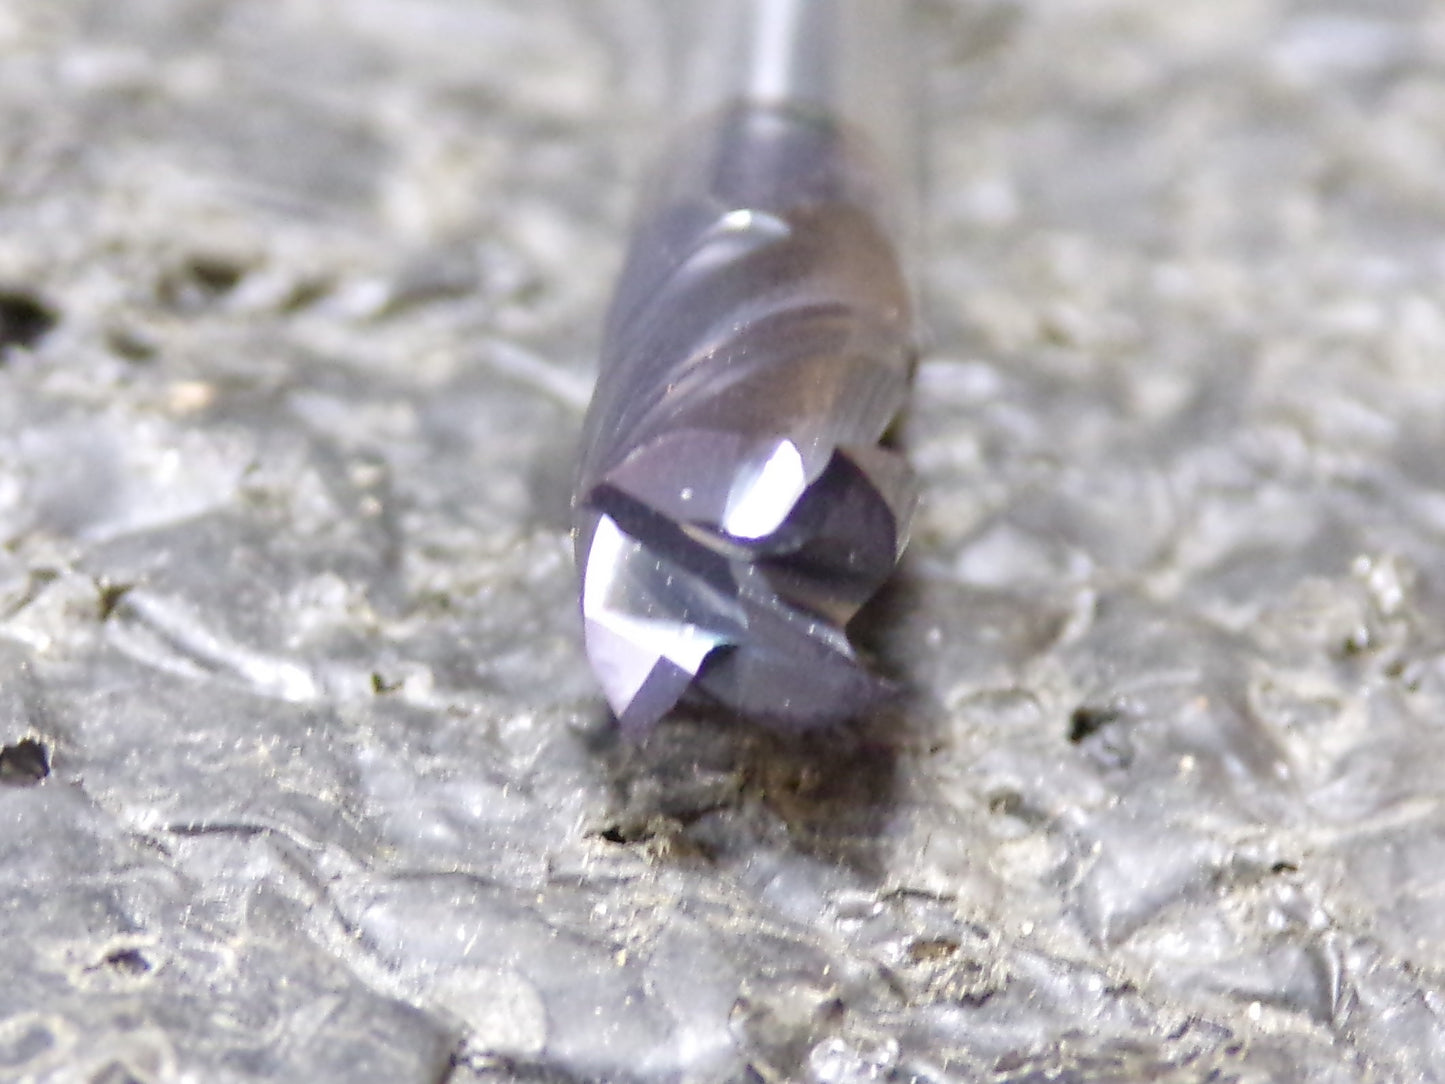 SECO TOOLS LLC (NIAGARA CUTTER) N89877 Square End Mill - CSD430 Series, Carbide Material, TiAlN Finish/Coating, Double End, 1/4 in Mill Diameter, 4 Flutes, 1/2 in Length of Cut (CR00649-WTA16)